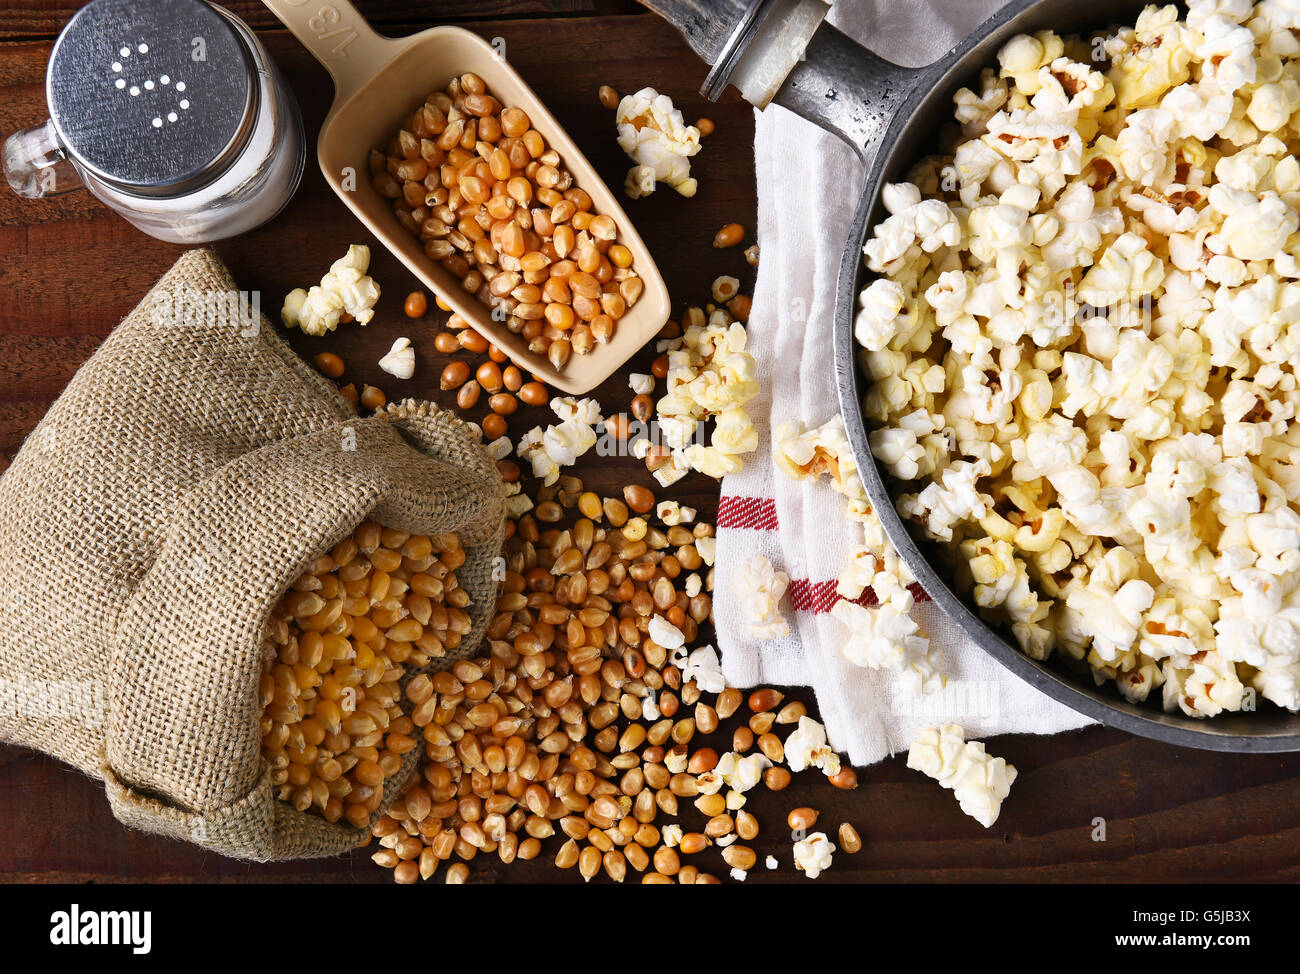 Top view of a pot full of freshly popped popcorn with salt and unpopped kernels on the side. Stock Photo